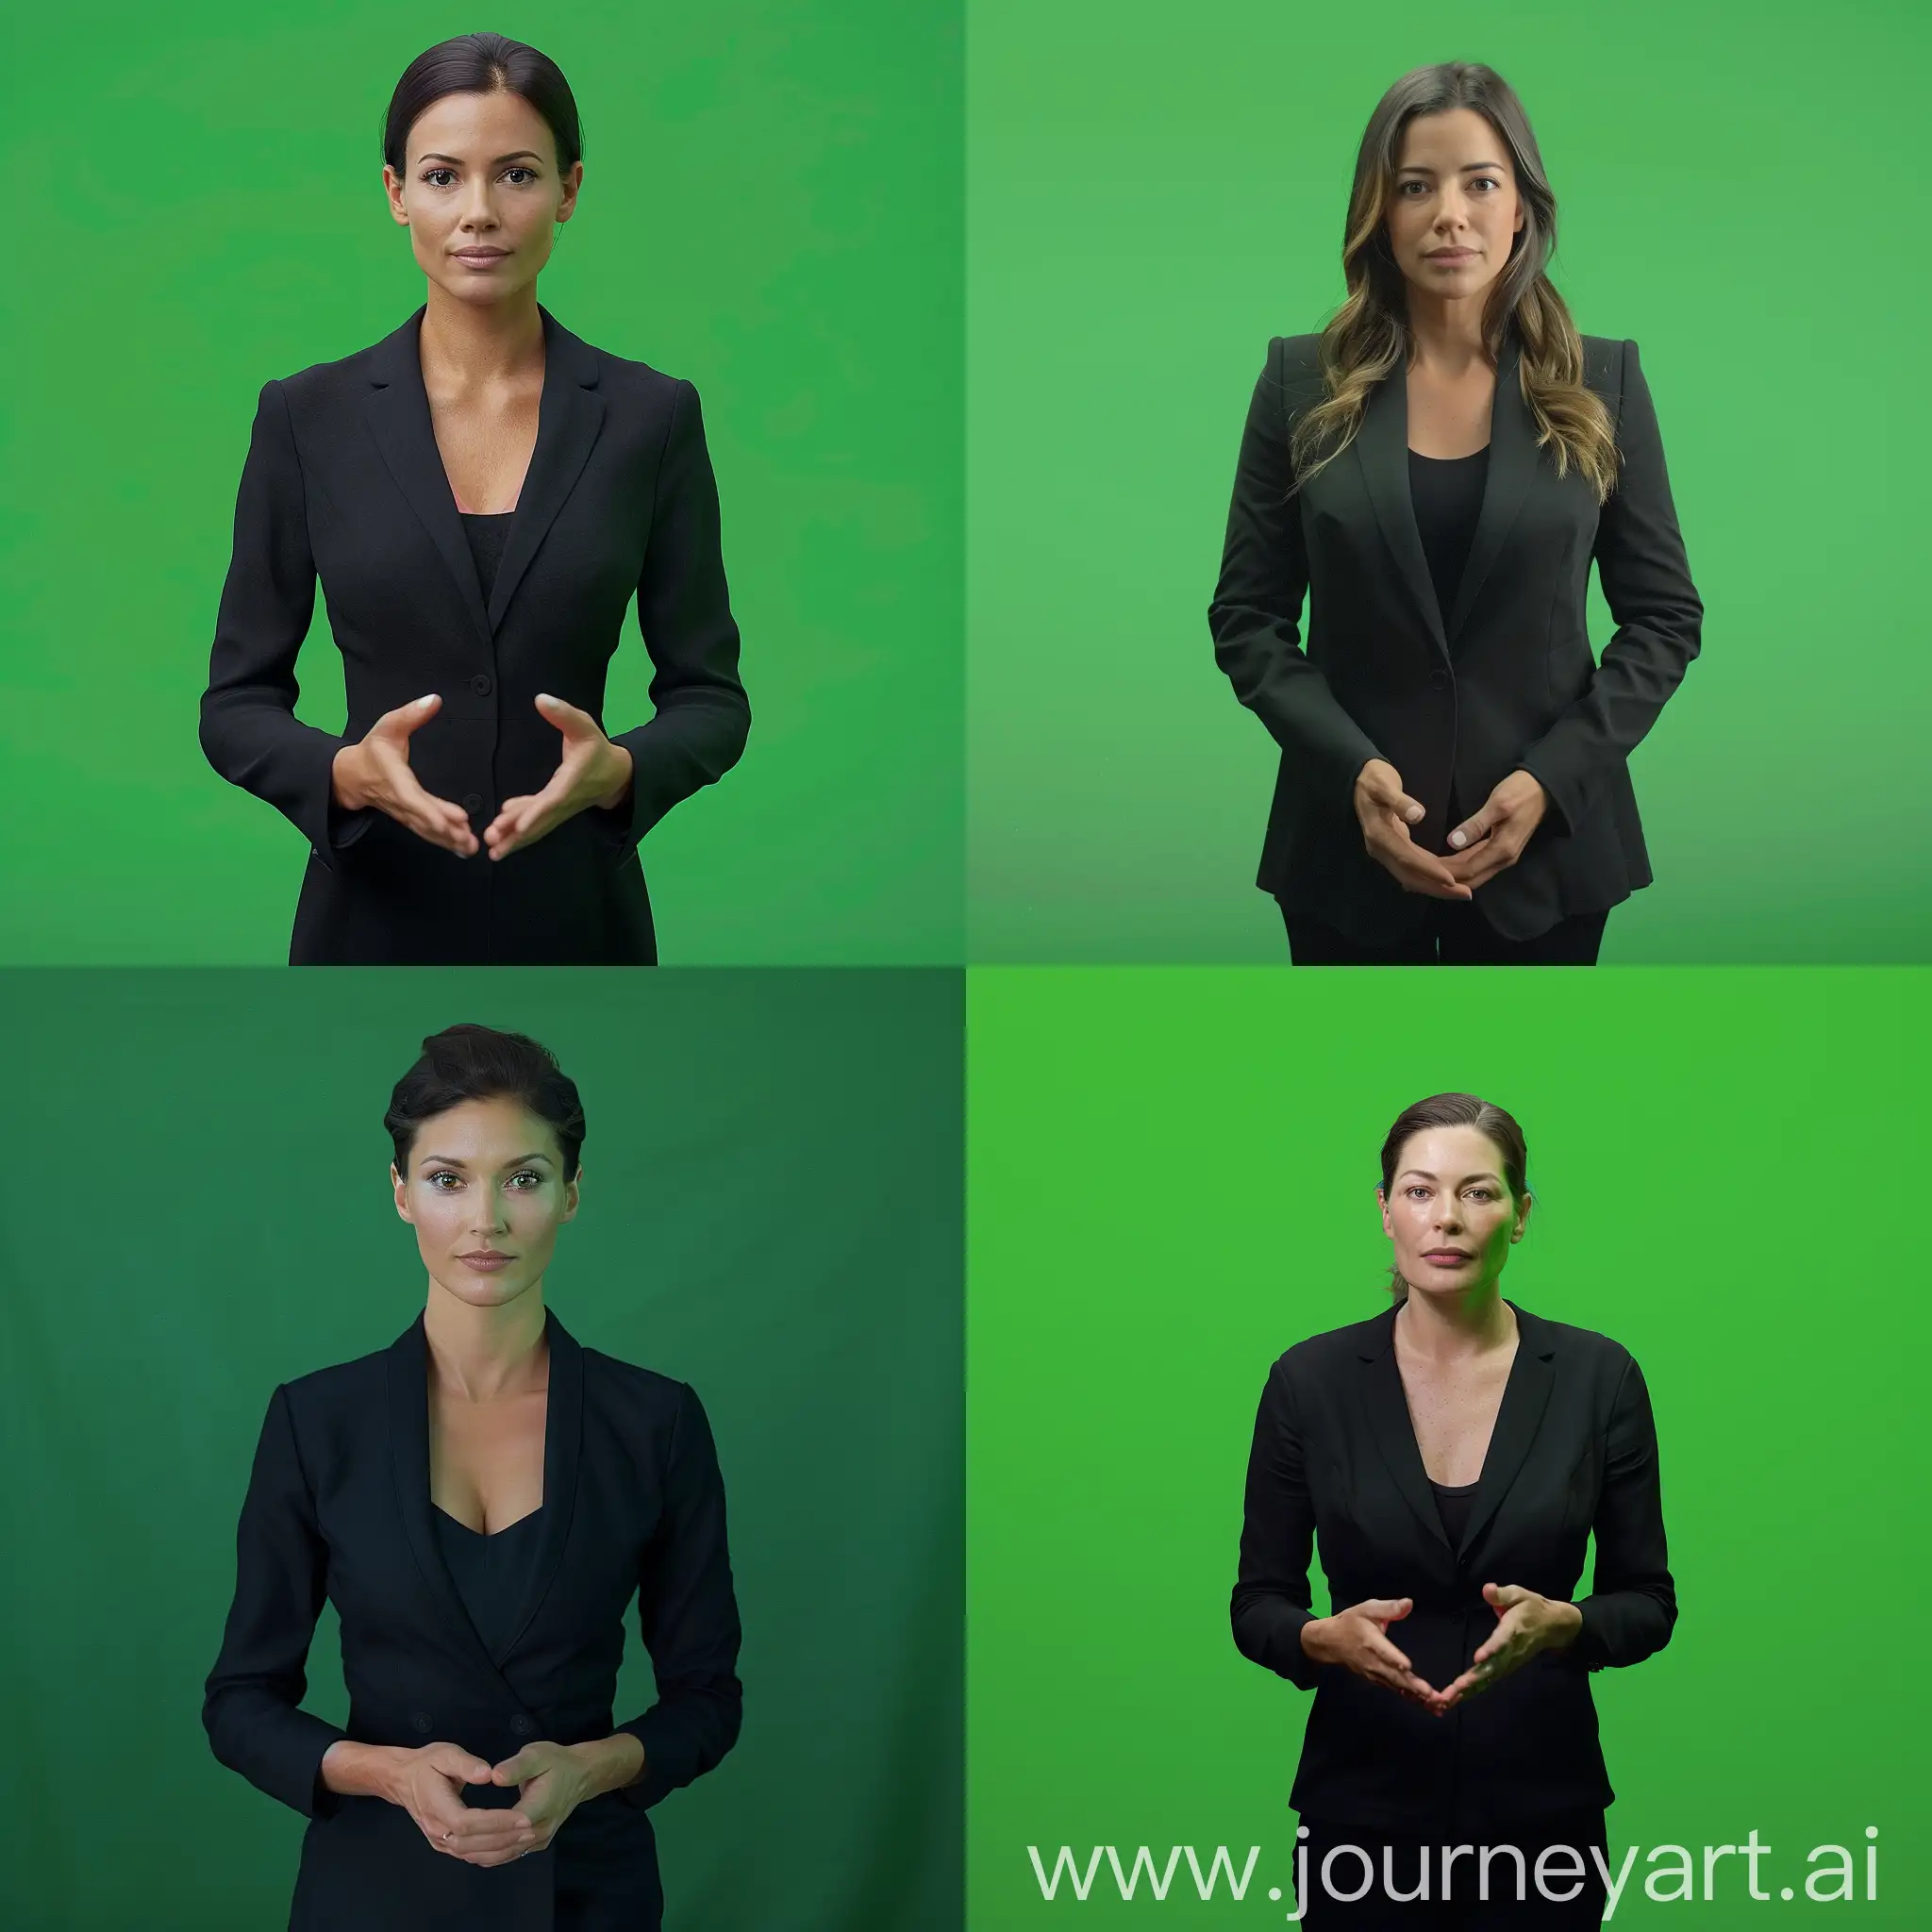 Produce a lifelike portrait of a female news presenter based on a real individual. The image should depict the presenter standing upright, showing their full body, with a natural expression. Their hands should be positioned close to each other in front of them. 
Utilize a high-quality, front-facing photograph with well-defined lighting (avoiding any shadows). 
The background should be chroma keyed with a vibrant green color (#00FF00) to enable seamless integration into various media formats.
 The final image should be in PNG format with dimensions of 1280x1280 pixels.
